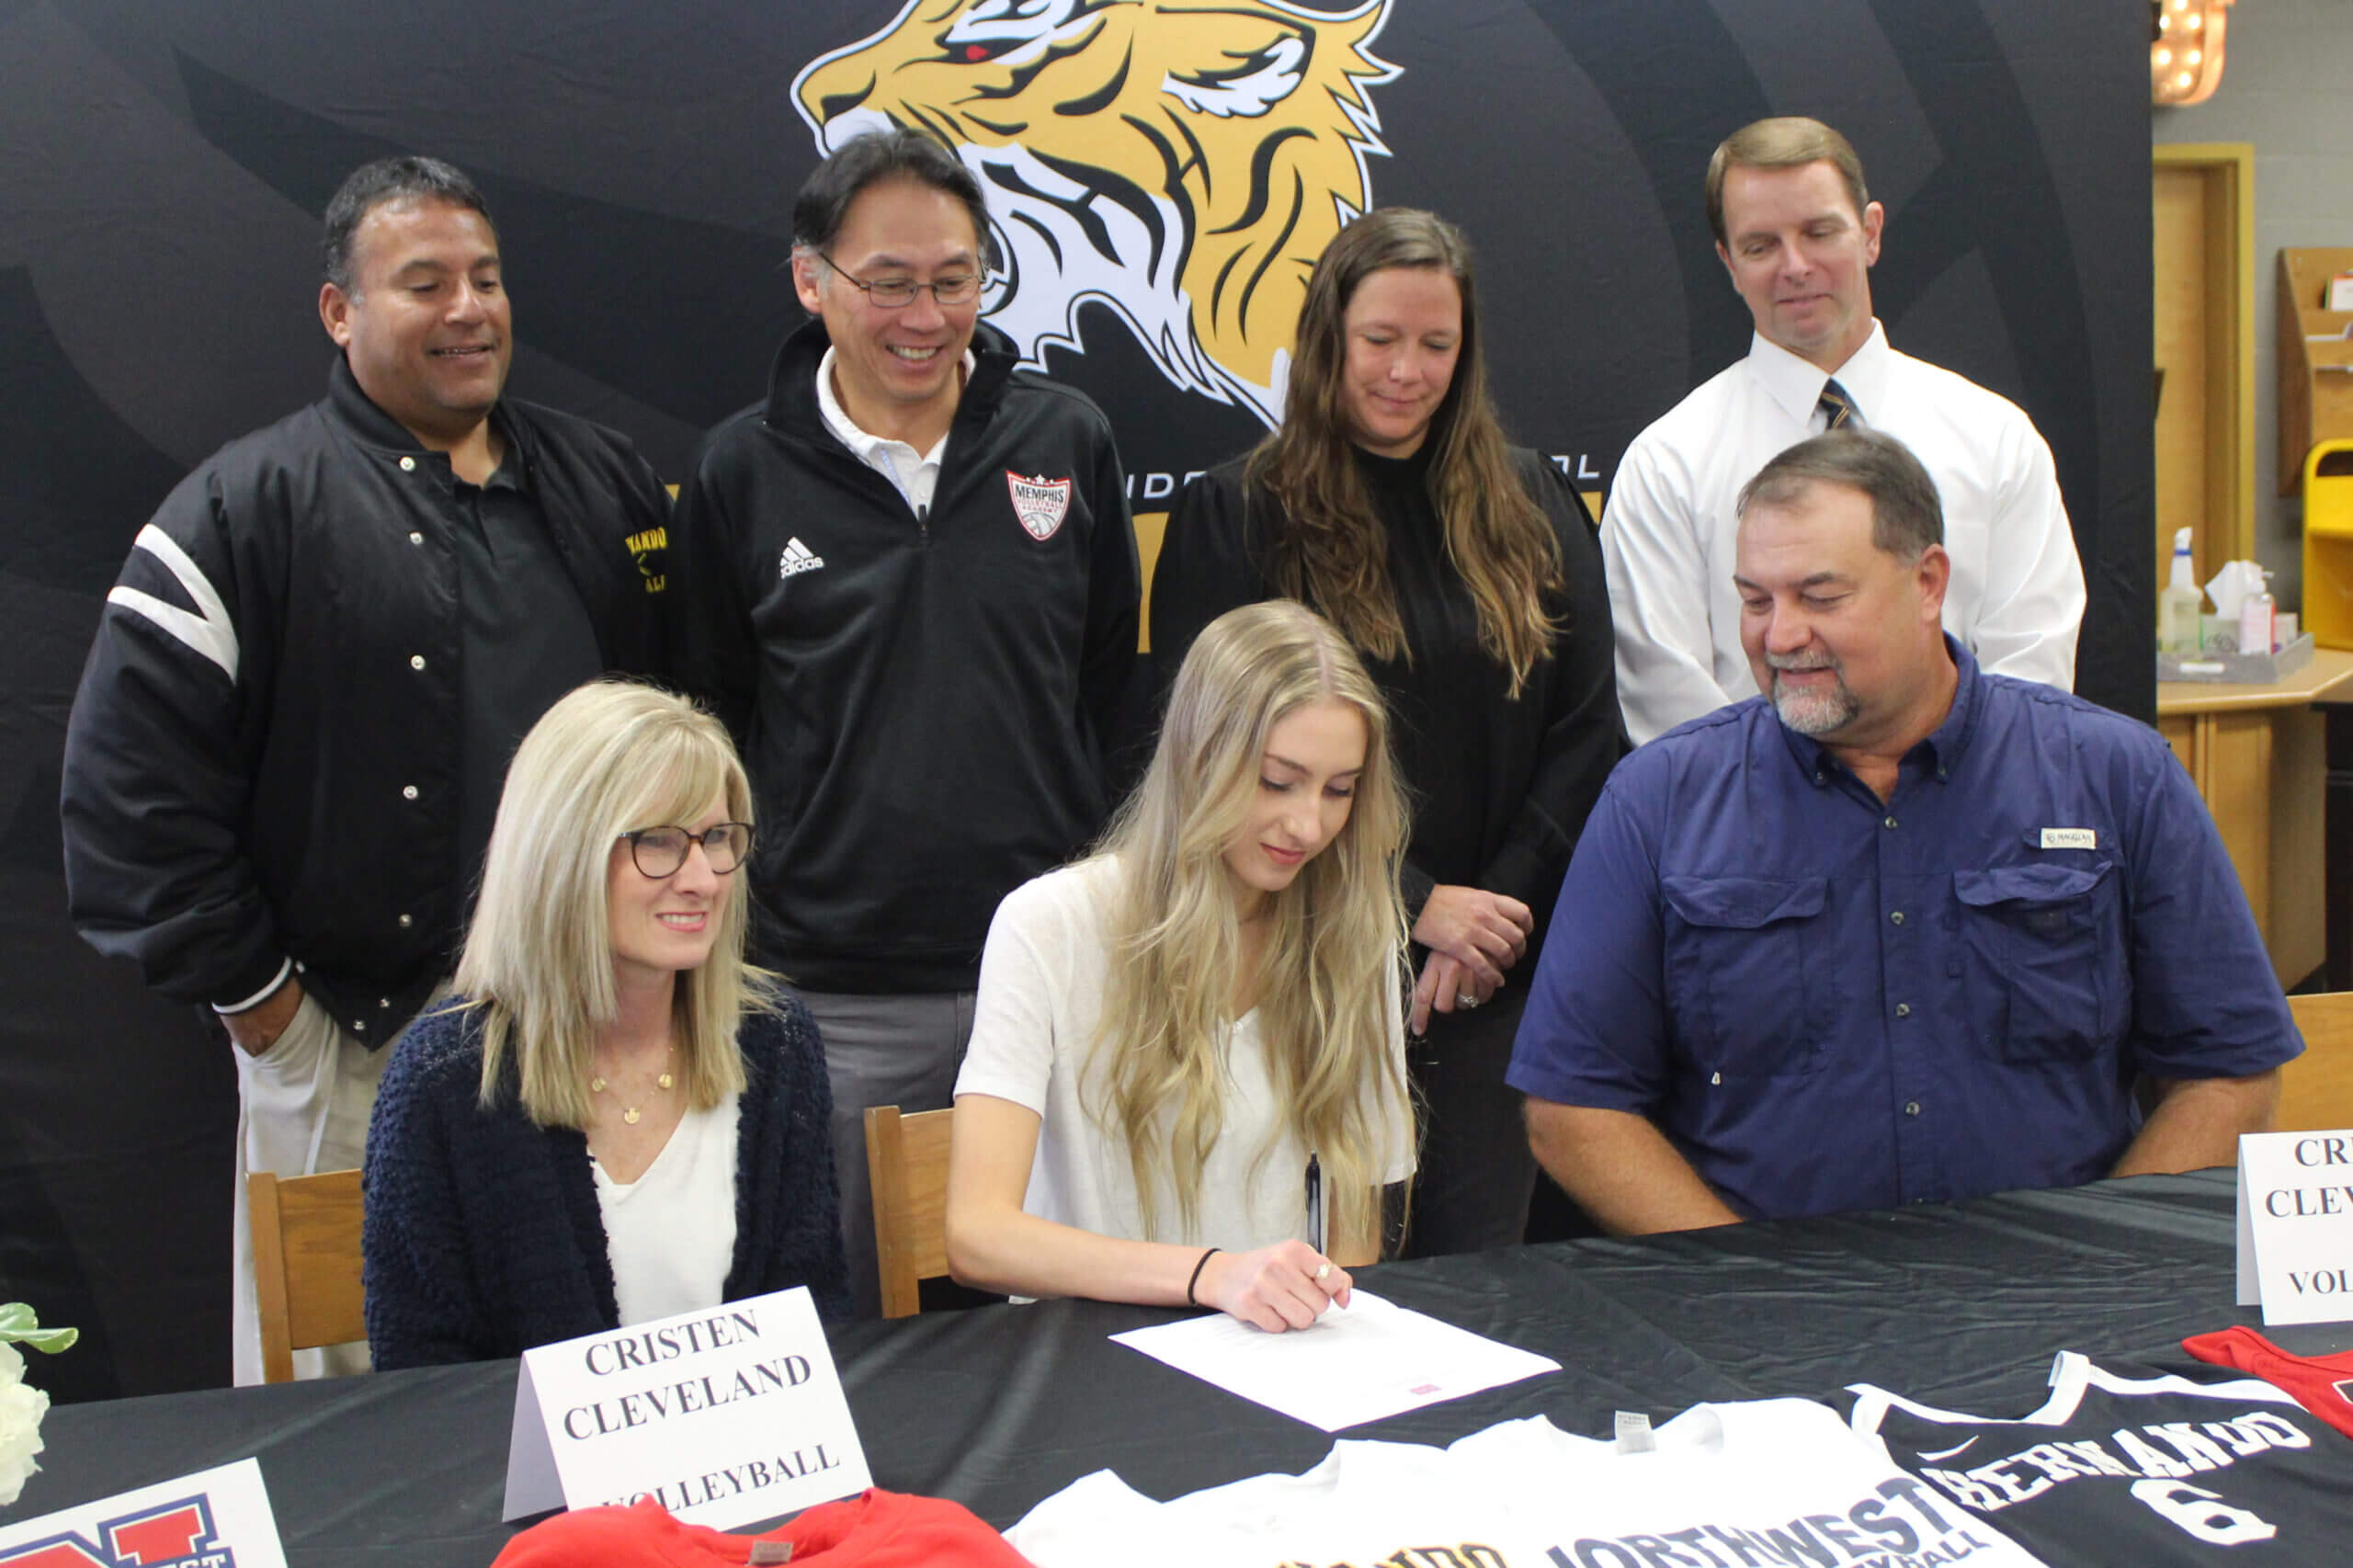 Cleveland signs for Northwest volleyball